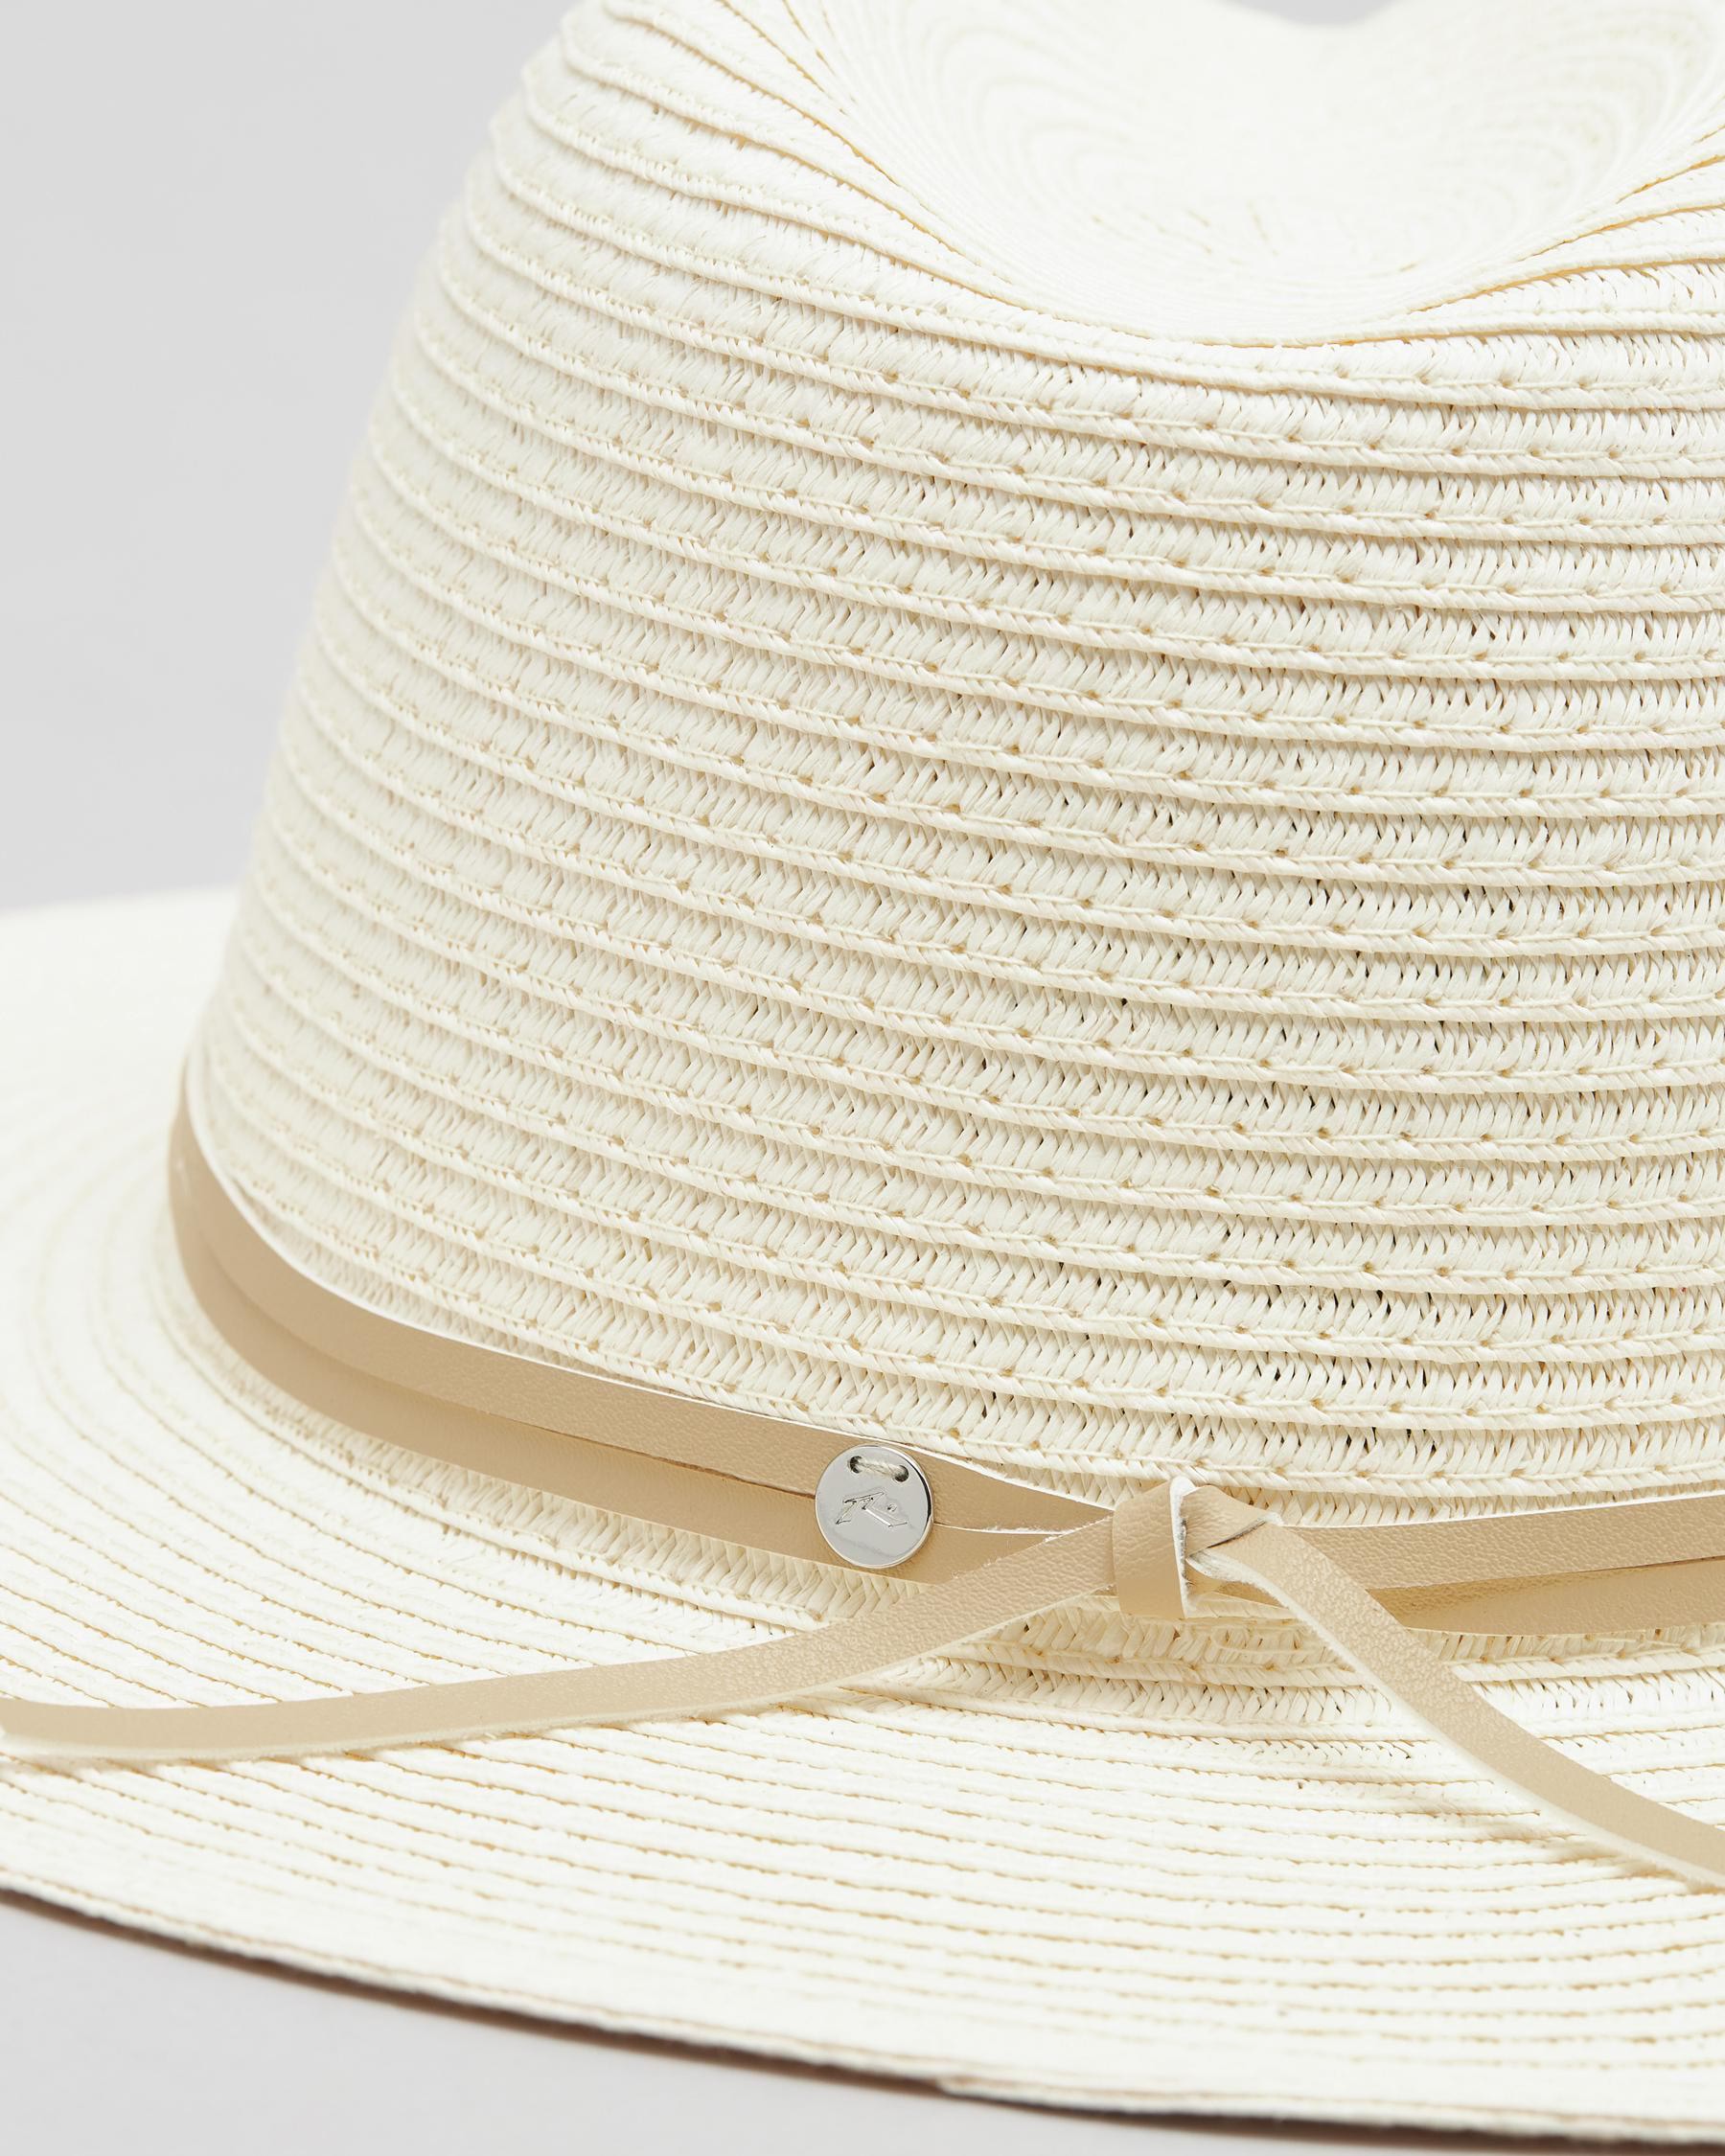 Rusty Gisele Panama Hat In Off White - Fast Shipping & Easy Returns ...